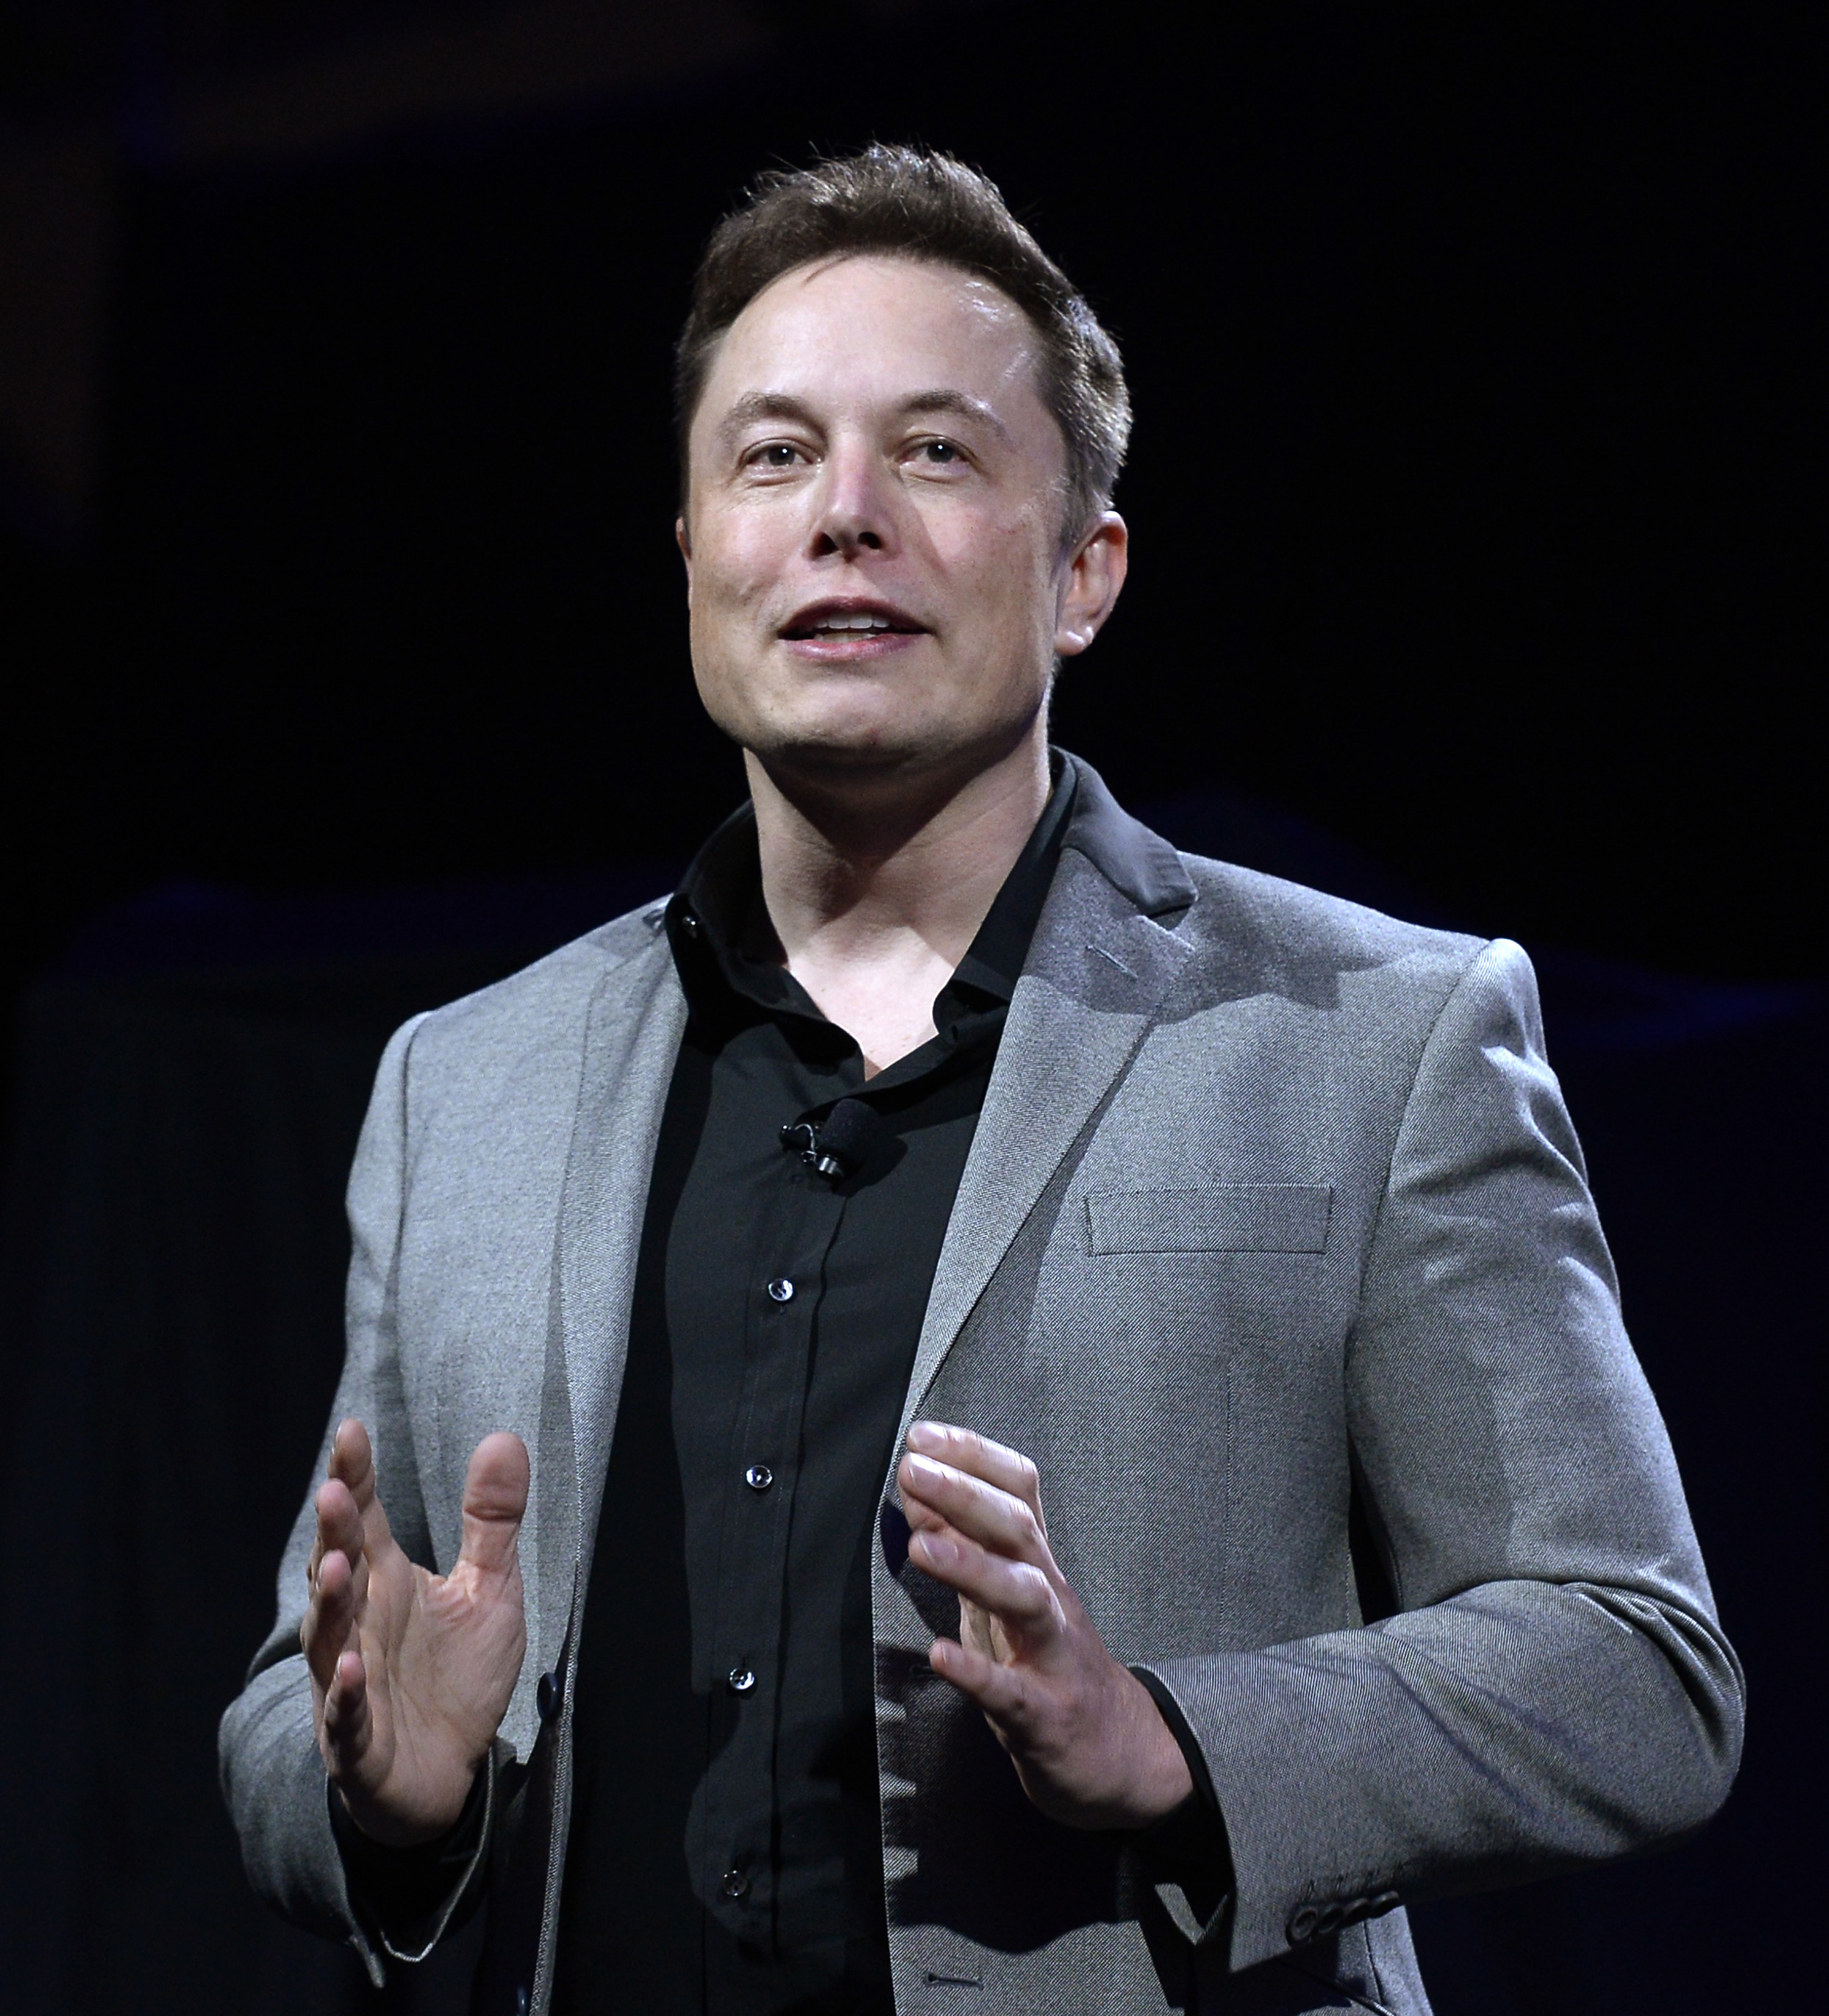 Elon Musk, CEO of Tesla, unveils batteries for homes, businesses, and utilities at Tesla Design Studio April 30, 2015 in Hawthorne, California.